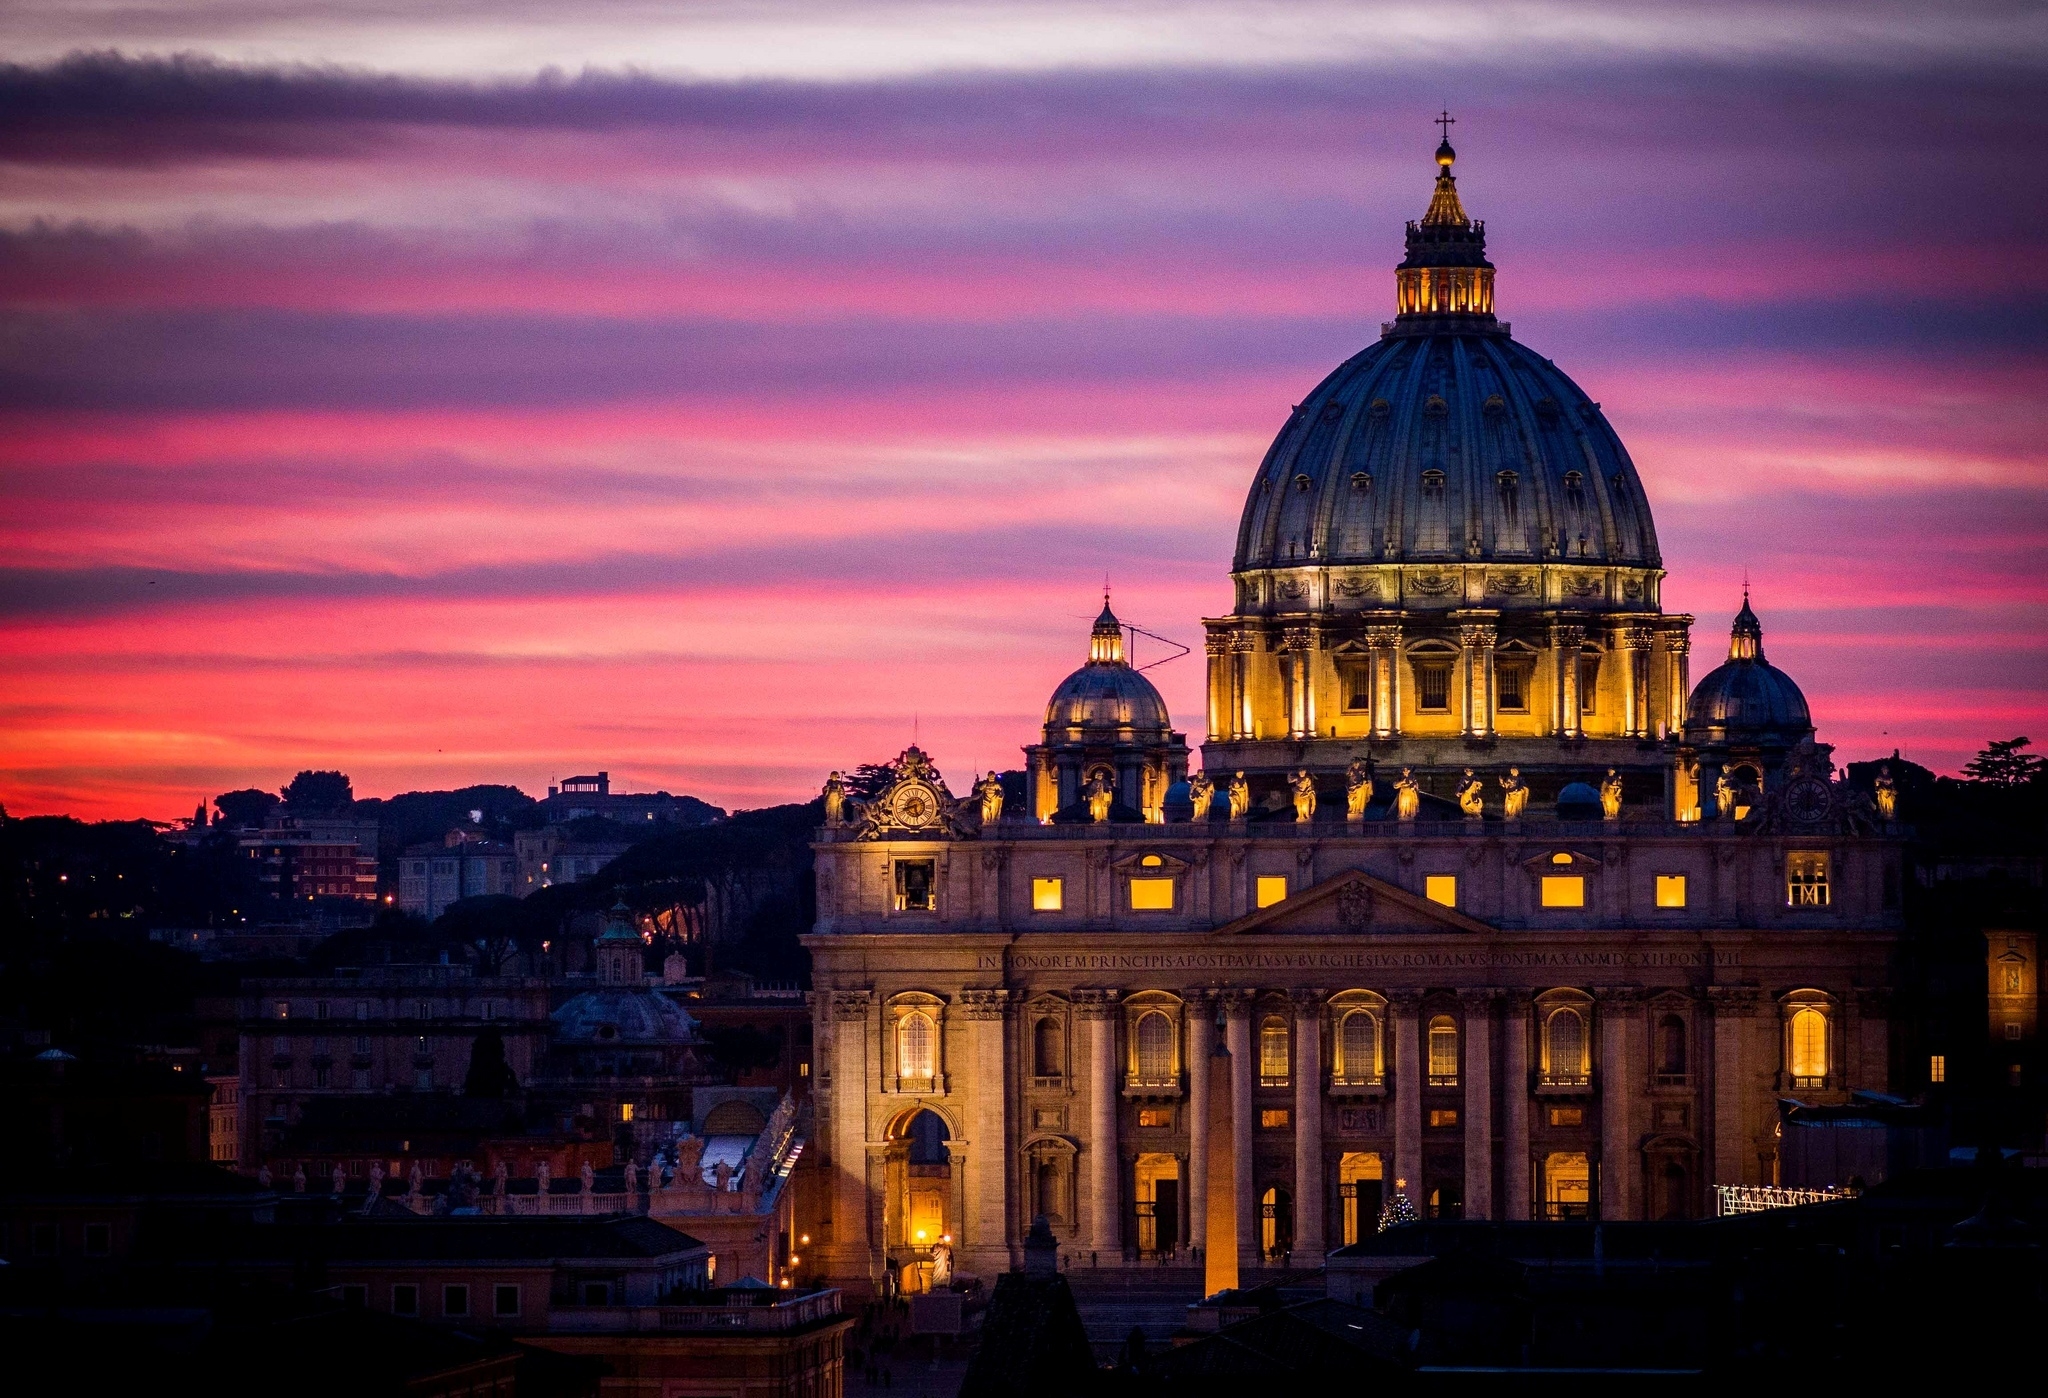 rome, st peter's basilica, saint paul's cathedral, vatican, cities, sunset, sky, architecture, italy, city, evening, st peters basilica